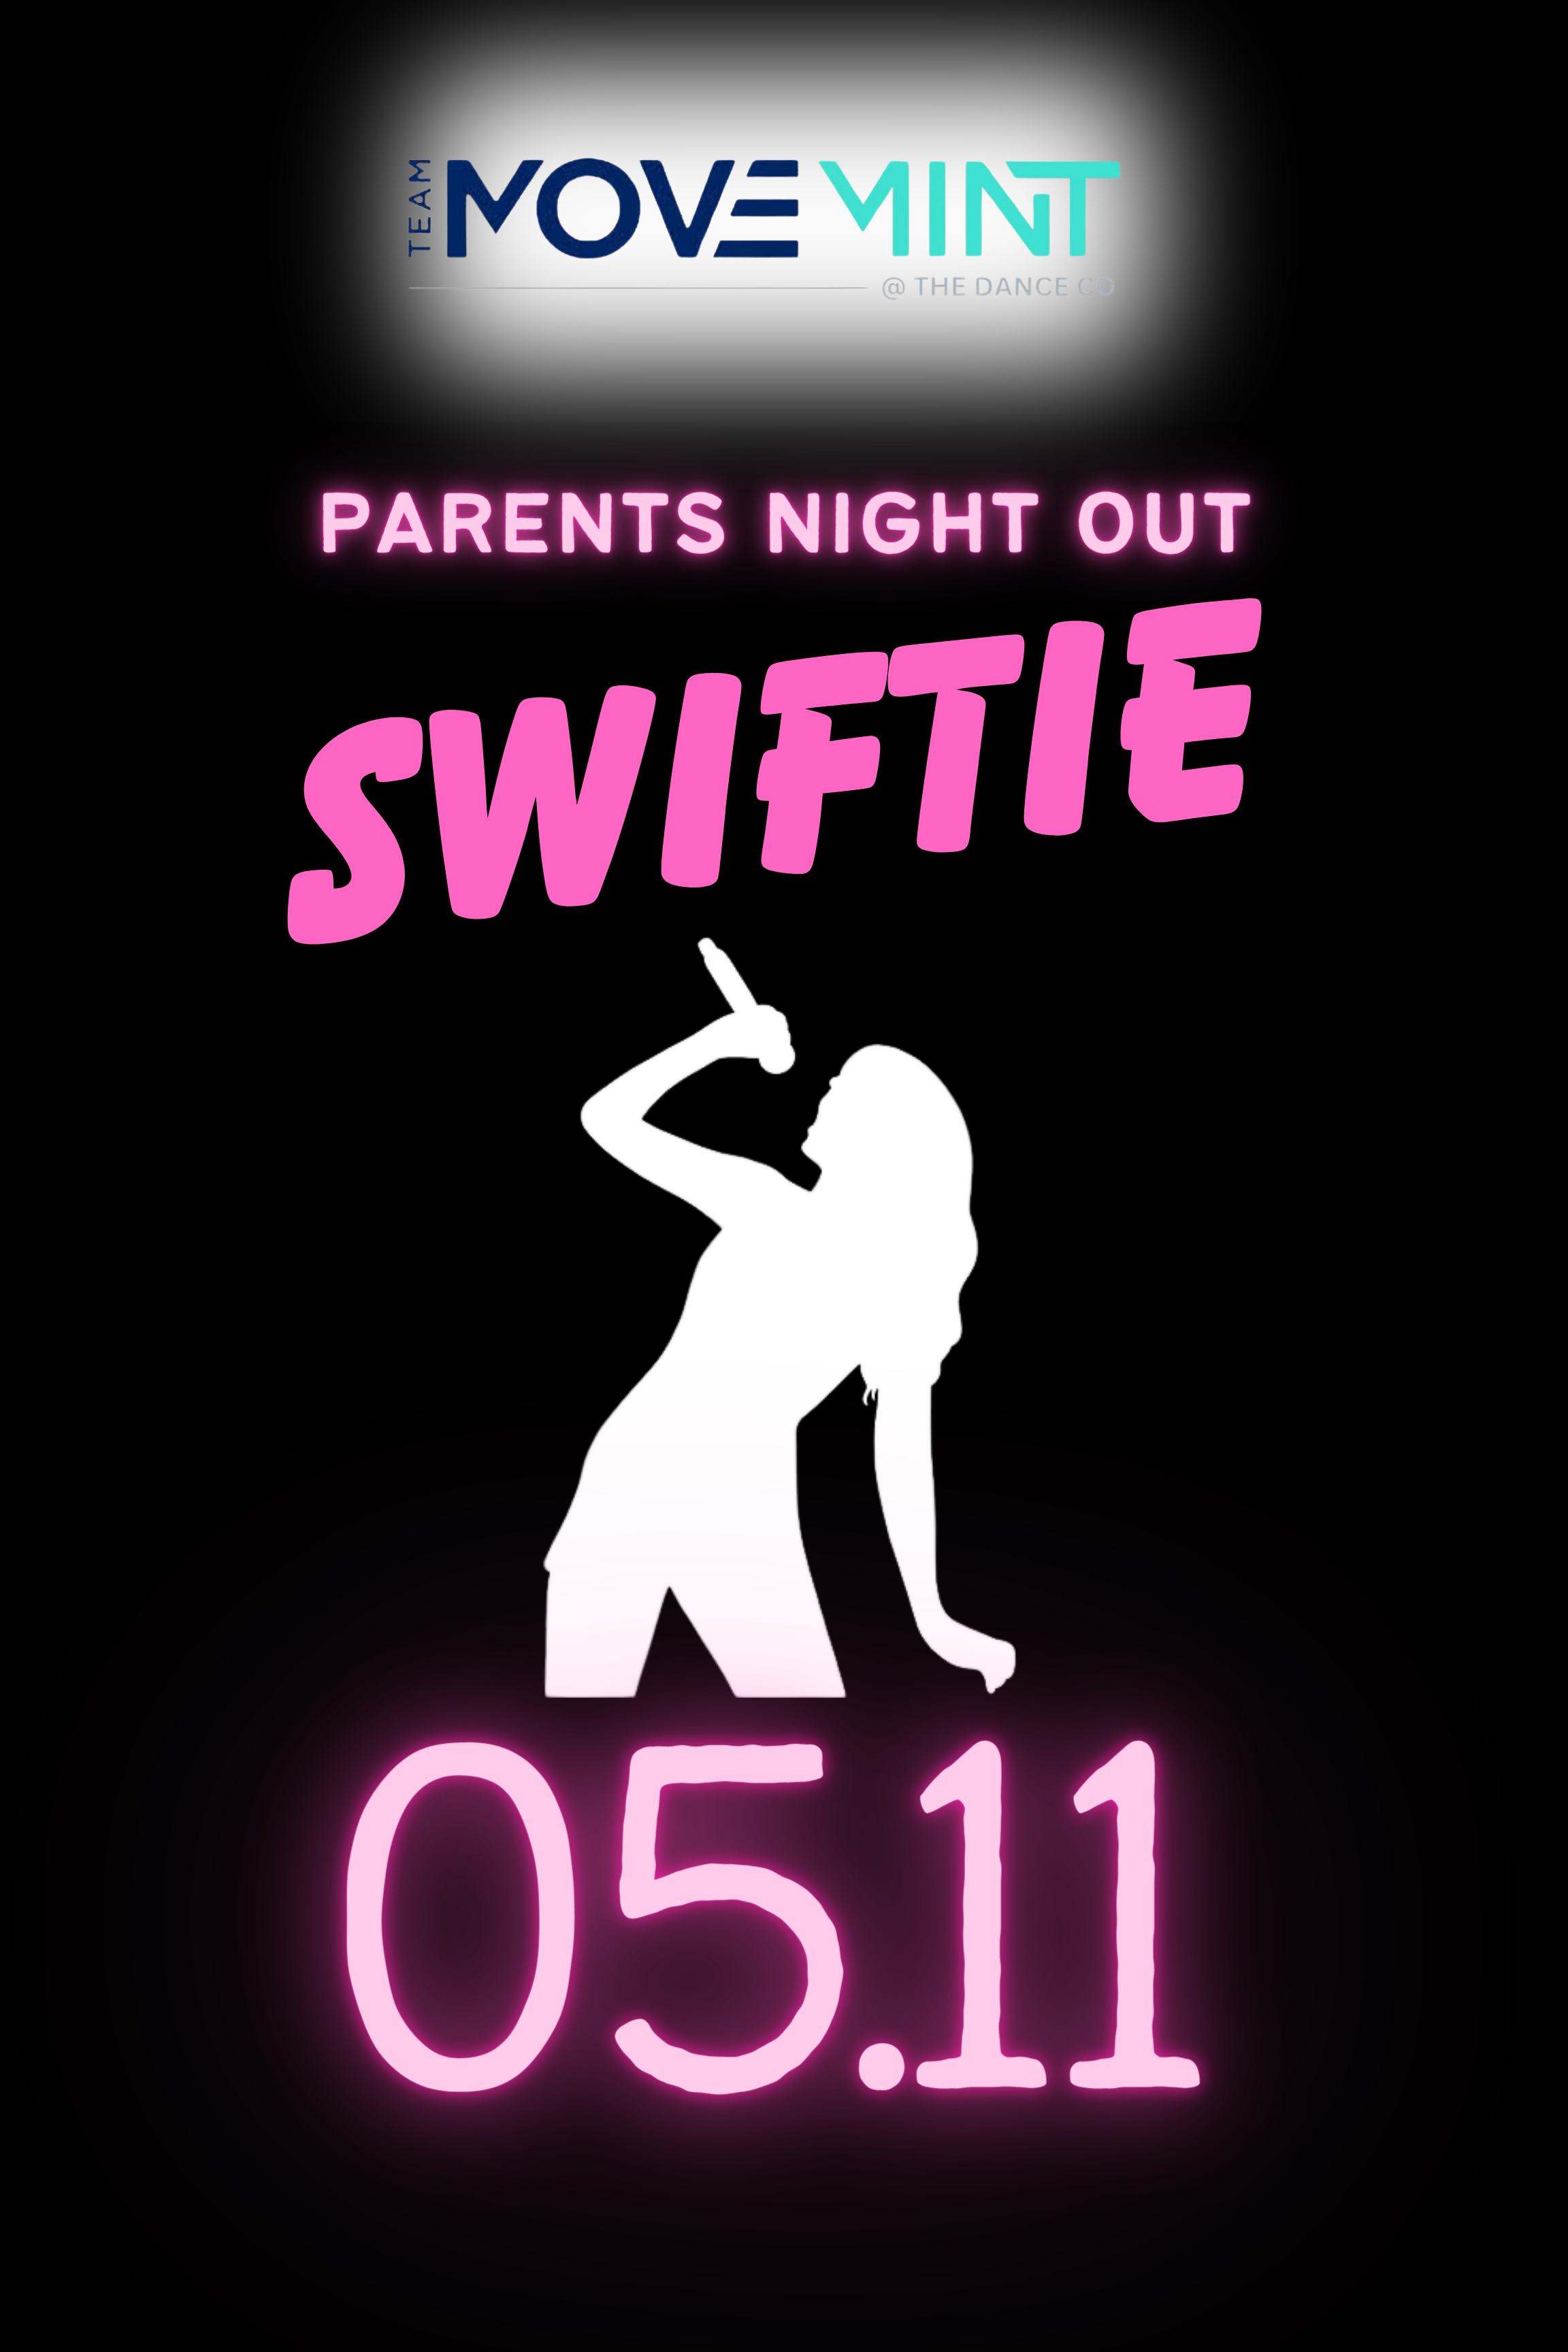 Parents Night Out: Swiftie